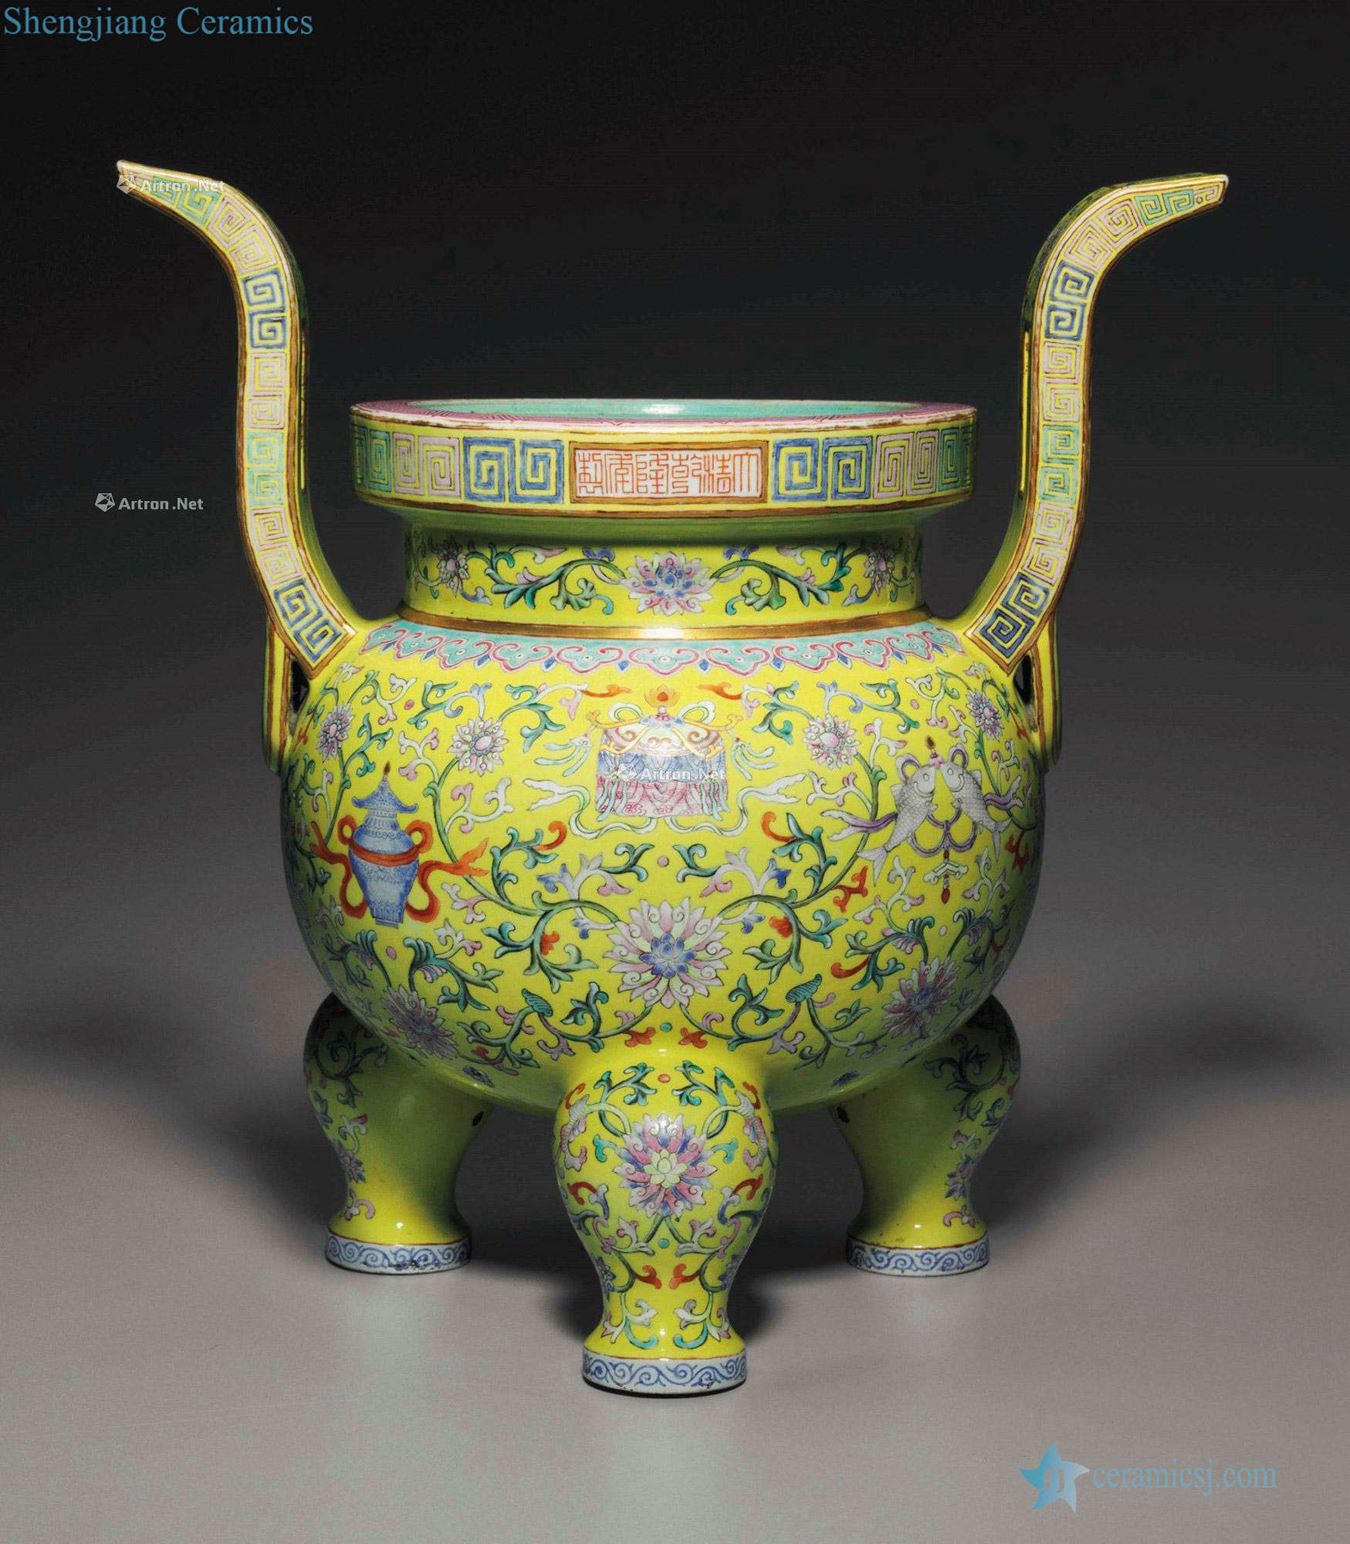 QIANLONG SIX ~ CHARACTER SEAL MARK IN IRON RED AND OF THE PERIOD (1736 ~ 1795), A LARGE YELLOW - GROUND FAMILLE ROSE TRIPOD CENSER